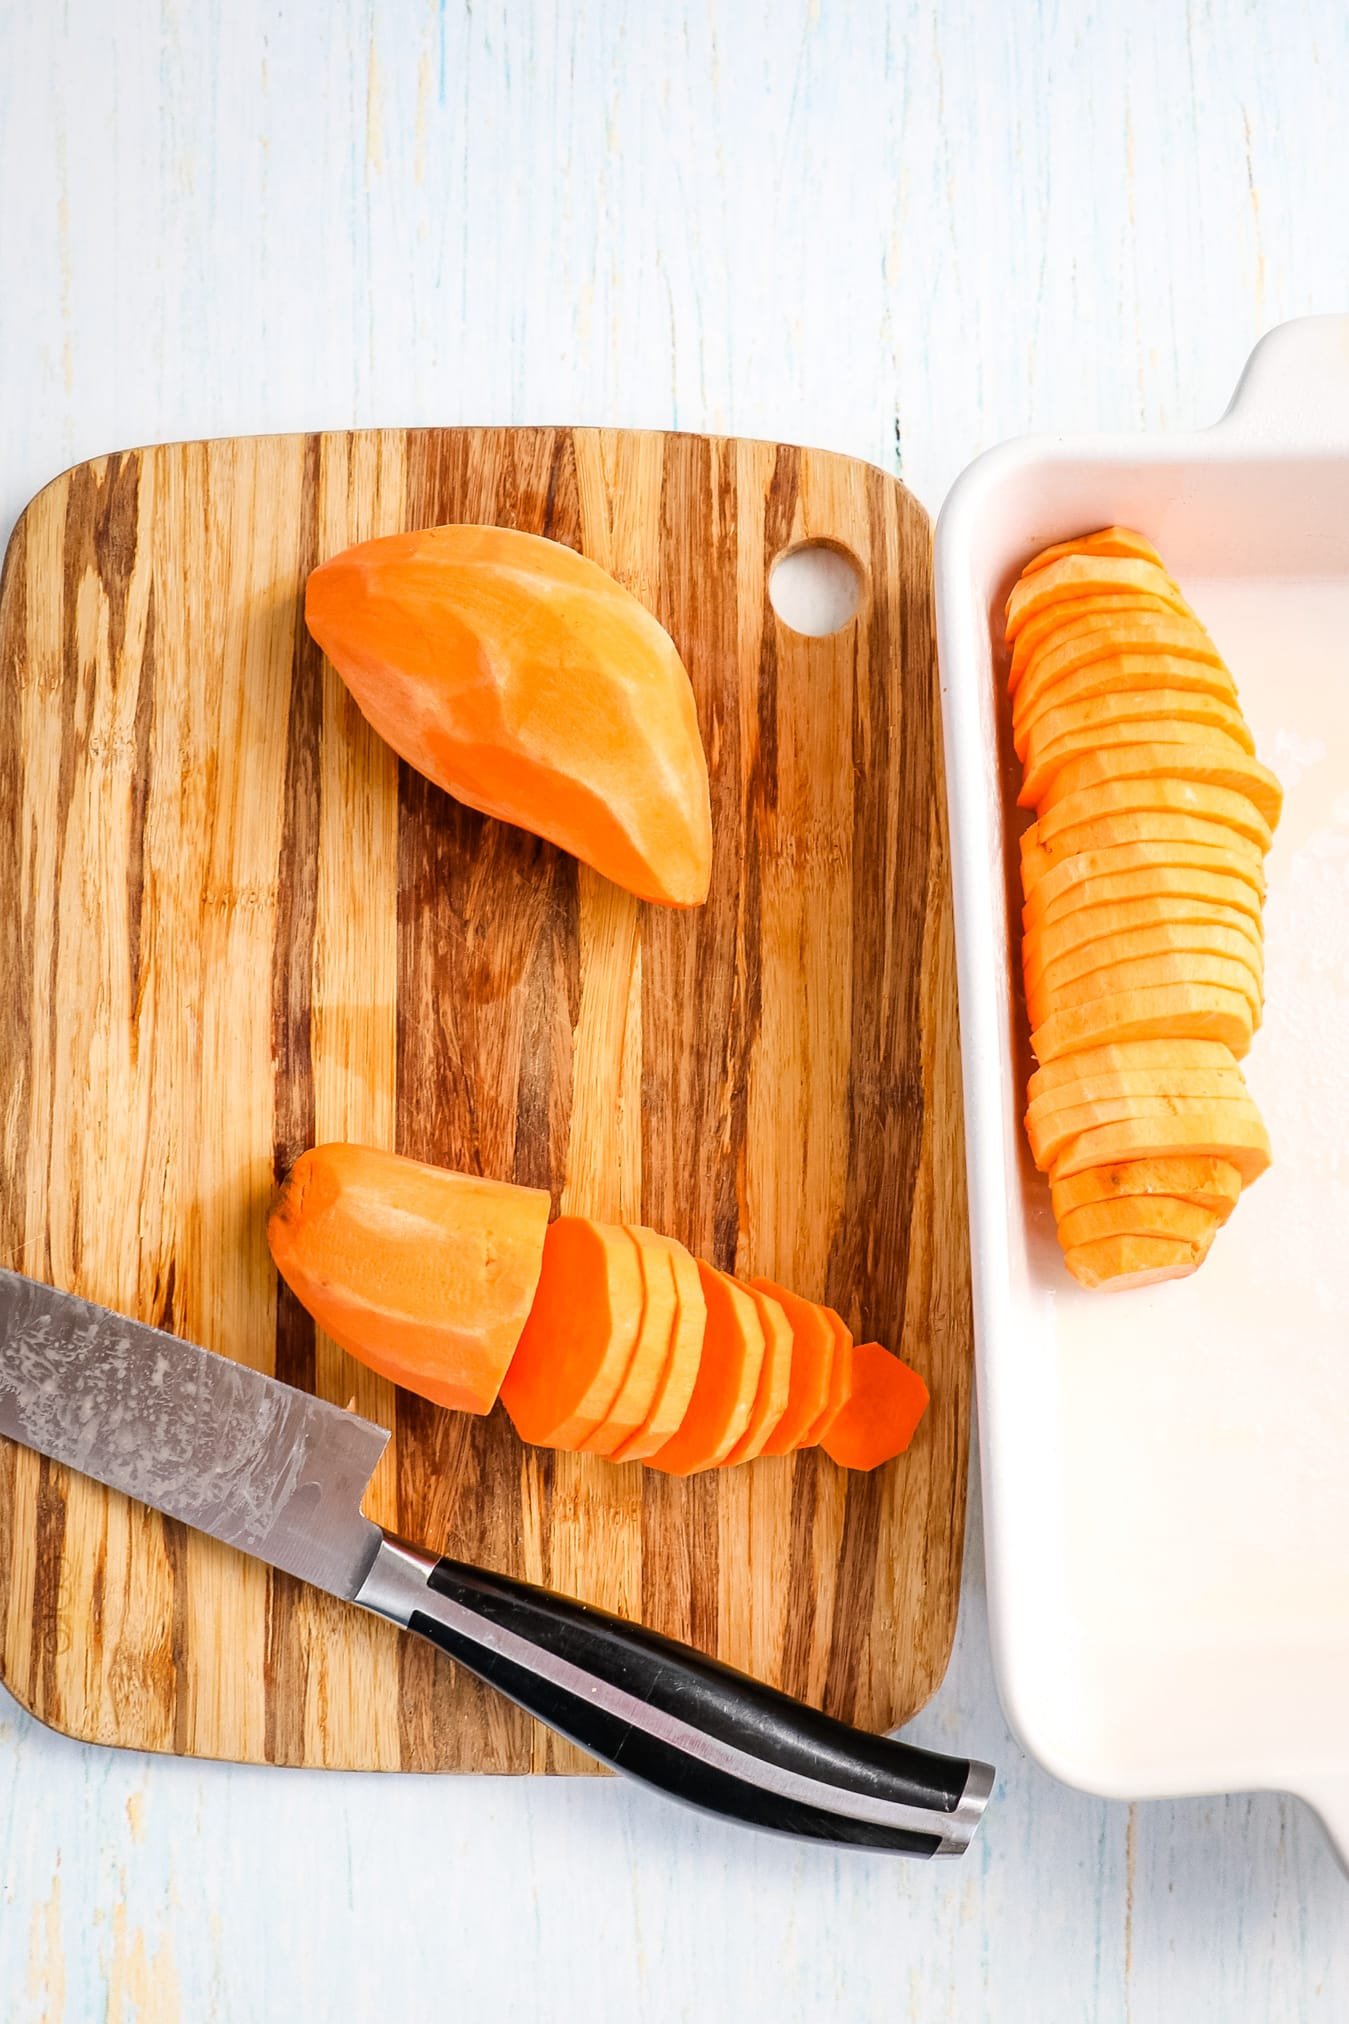 Hasselback sweet potatoes being sliced and placed in baking dish.